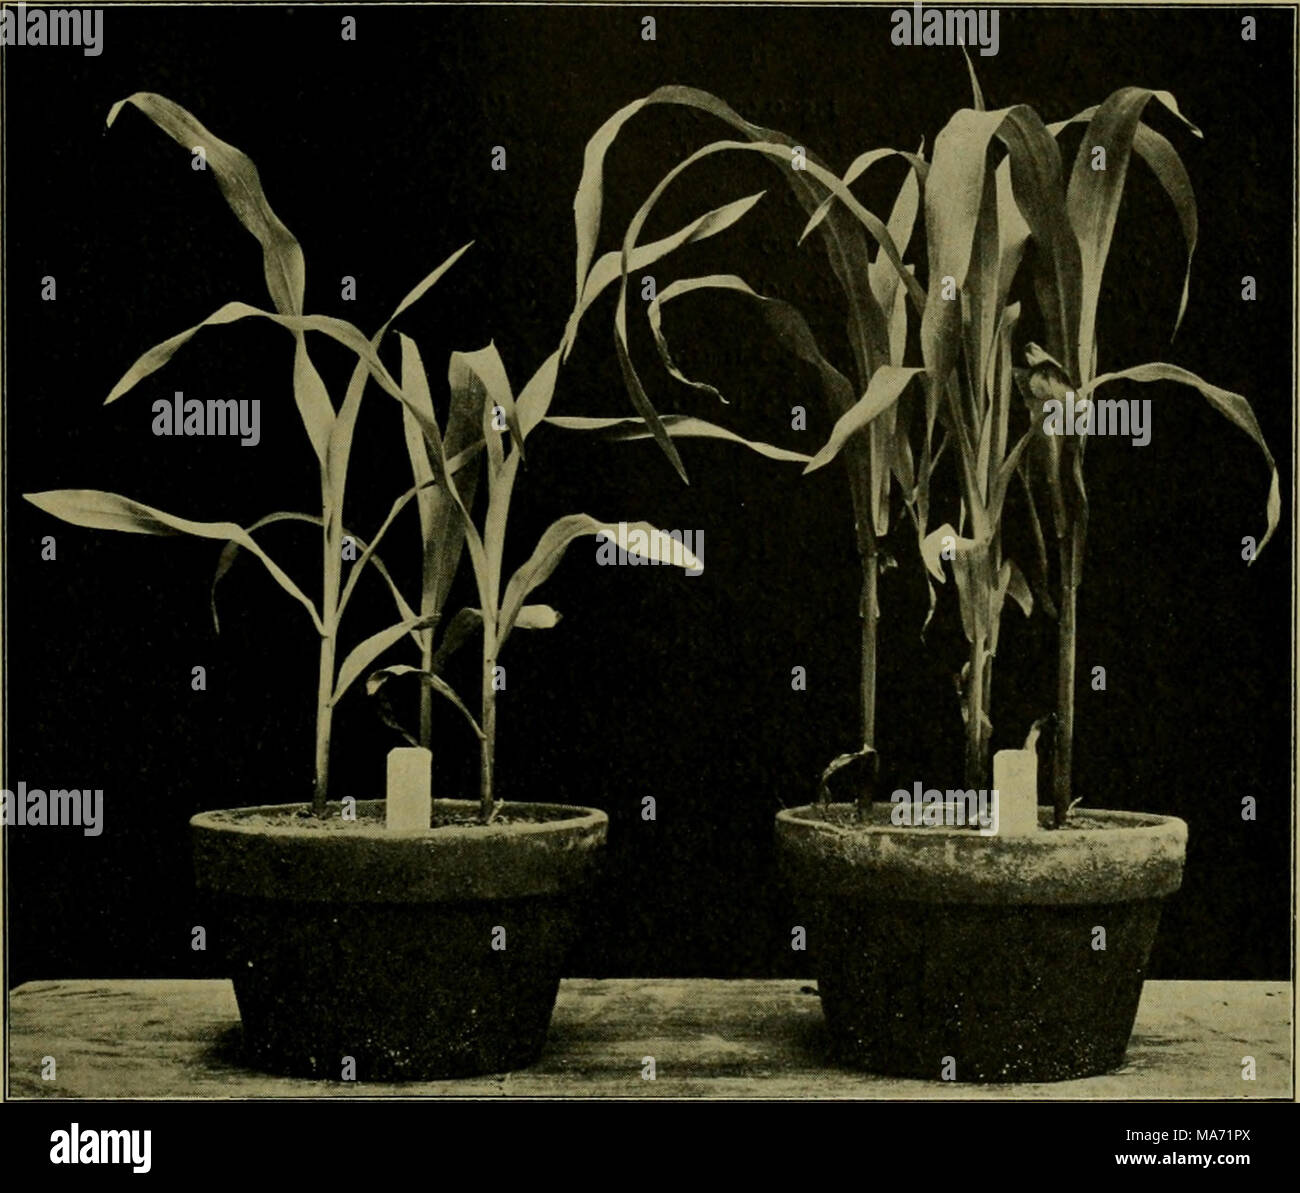 . Effects of the rays of radium on plants . Fig. 15. Experiment 26. Retardation of Growth of Zea Mays by Exposing Grains, before Planting, to a Sealed Glass Tube of Radio-Tellurium. Duration of Exposure, 24 Hours. ^a 3 J II, 10 A.M. A B D E 1,800,000 X 1,500,000 X Ra. Tel. Control I 0.00 mm. 13.50 mm 22.50 mm. 29.50 mm 2 6.00 7.00 17.00 28.00 3 0.00 7.00 0.00 23.00 4 4.00 3.00 20.00 22.50 10.00 mm. 30.50 mm. 59.50 mm. 103.00 mm 5.00 mm. 7.62 mm. 19,83 mm. 25.75 mm Stock Photo